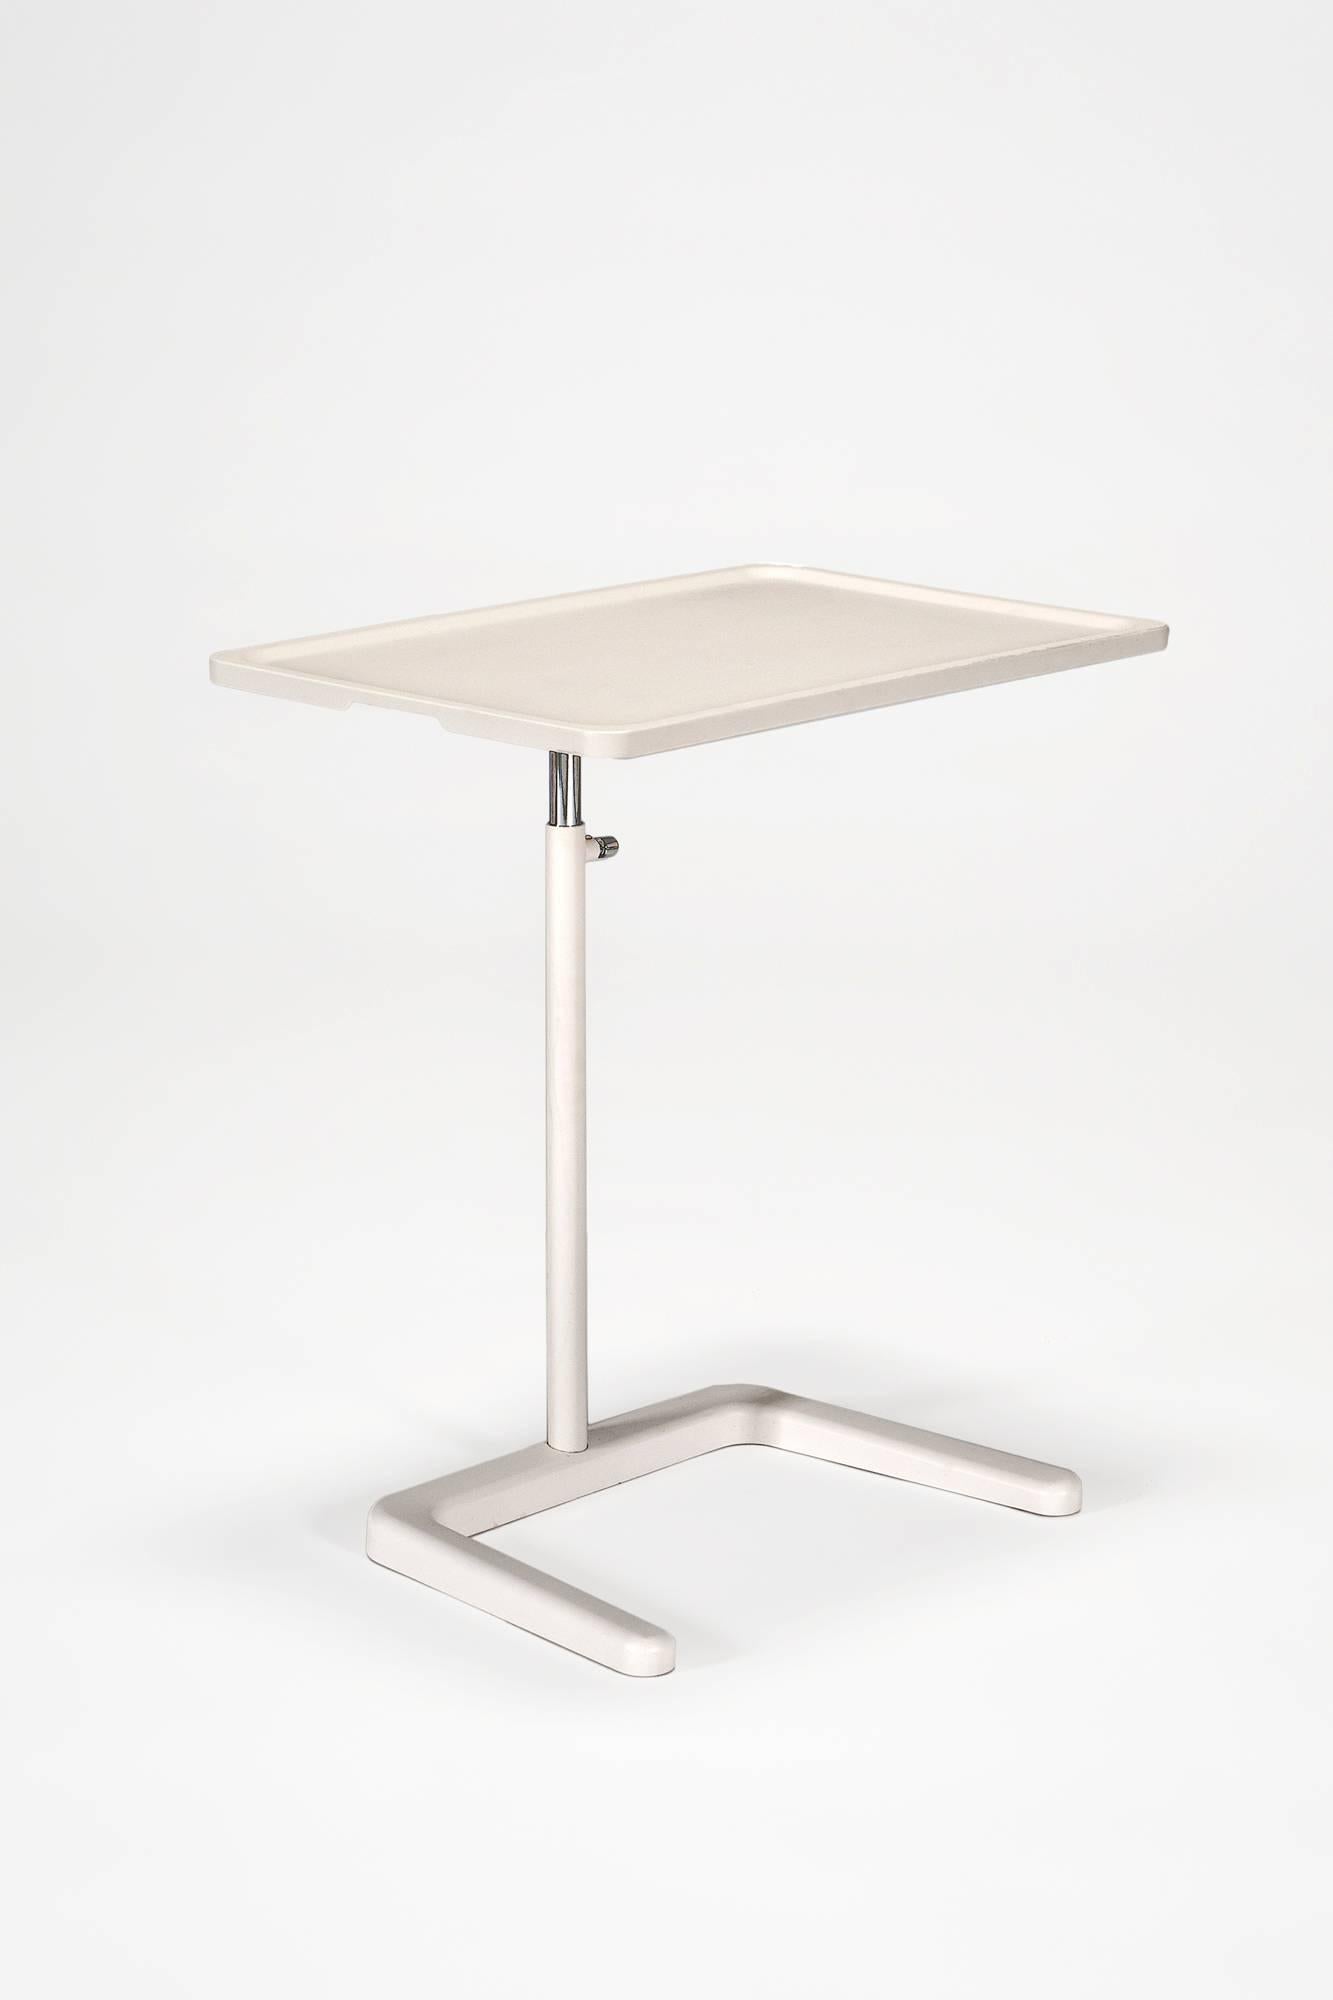 Adjustable occasional table designed for multiple uses. The surface of this occasional table is height and tilt adjustable, perfect for laptop use, making it possible to maintain a correct ergonomic working posture, even while working from a sofa or